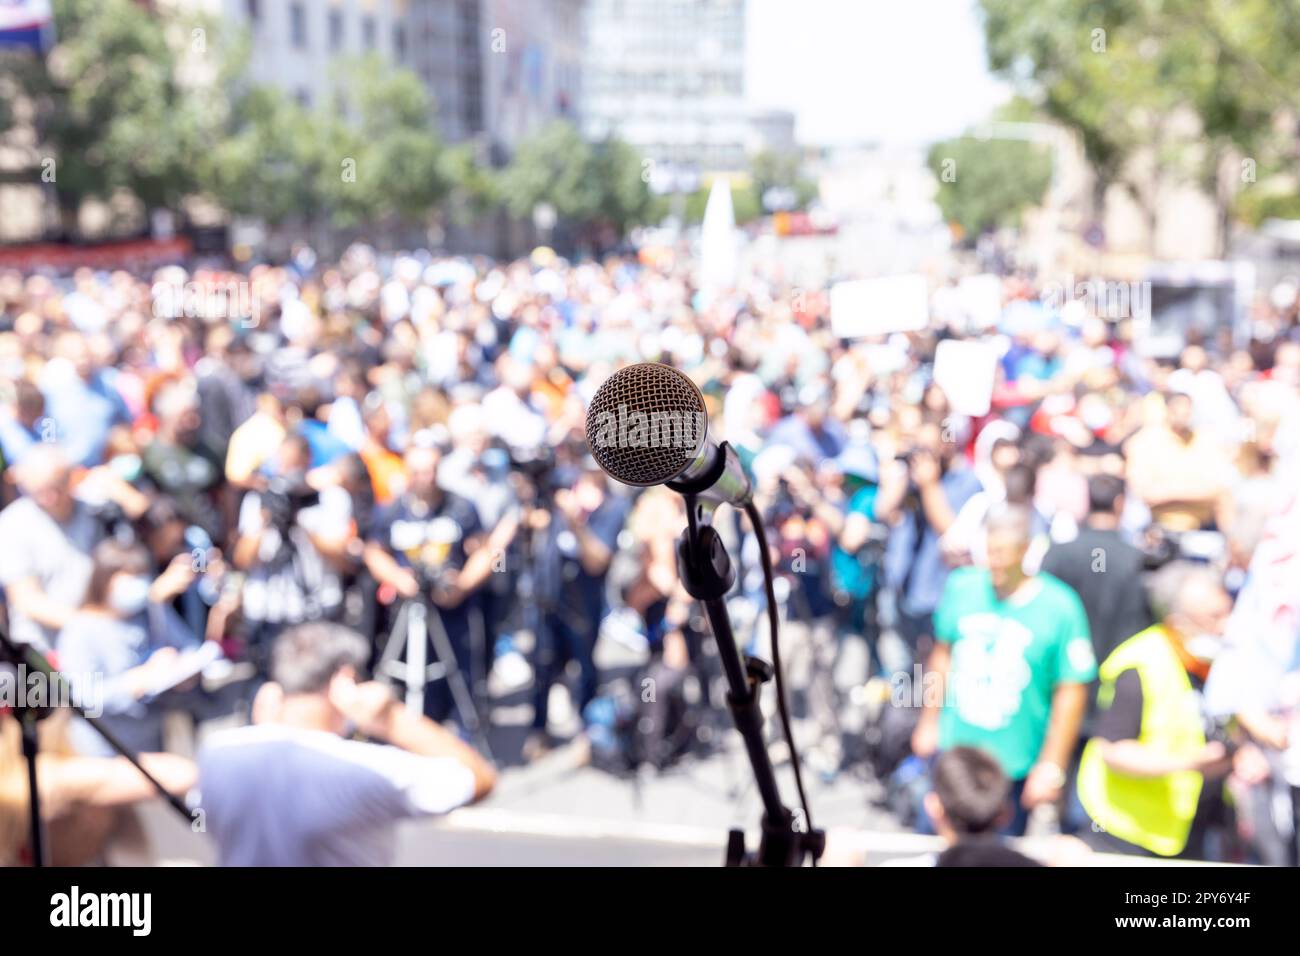 Focus on microphone, blurred group of people at mass protest against Covid-19 lockdown Stock Photo